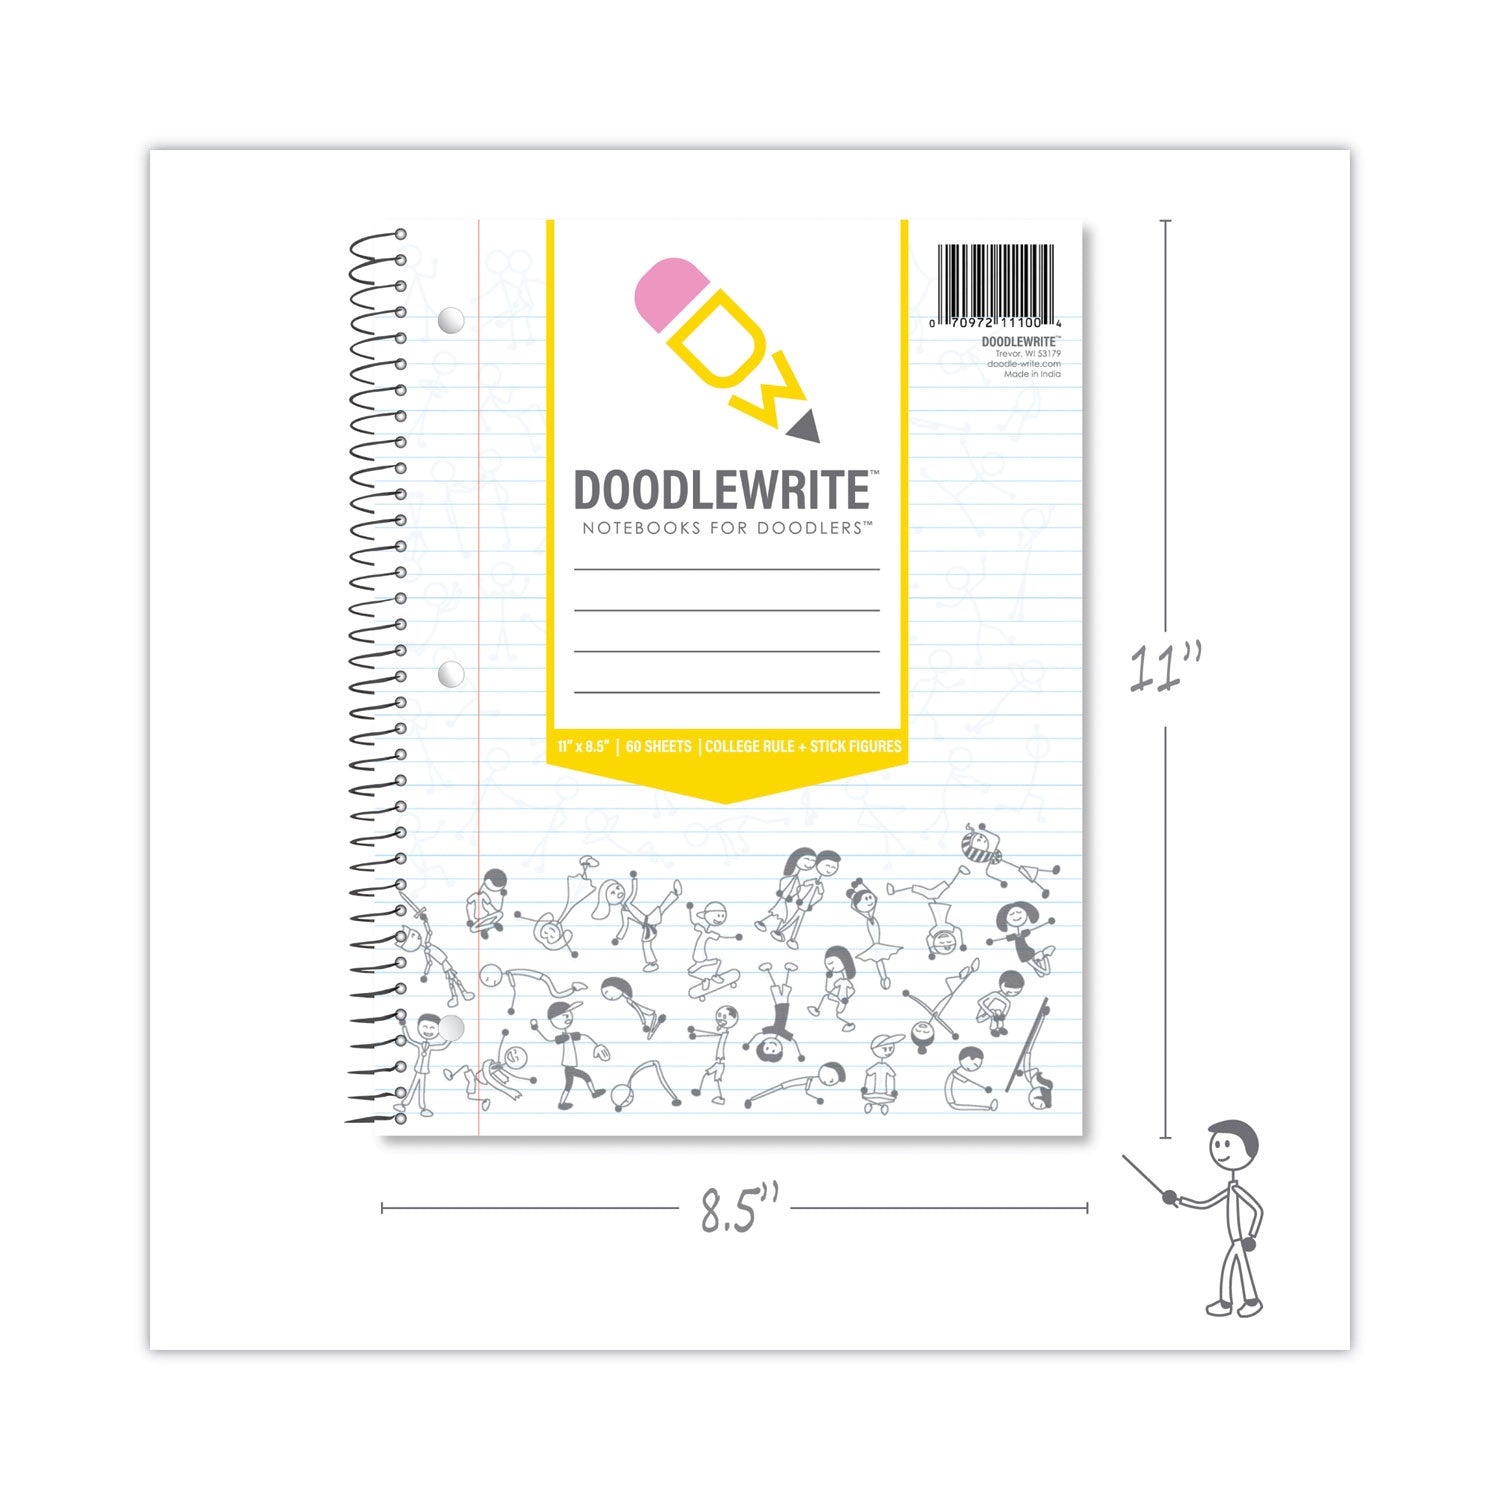 doodlewrite-notebooks-1-subject-wide-legal-rule-white-cover-50-sheets-24-carton-ships-in-4-6-business-days_roa11101cs - 3